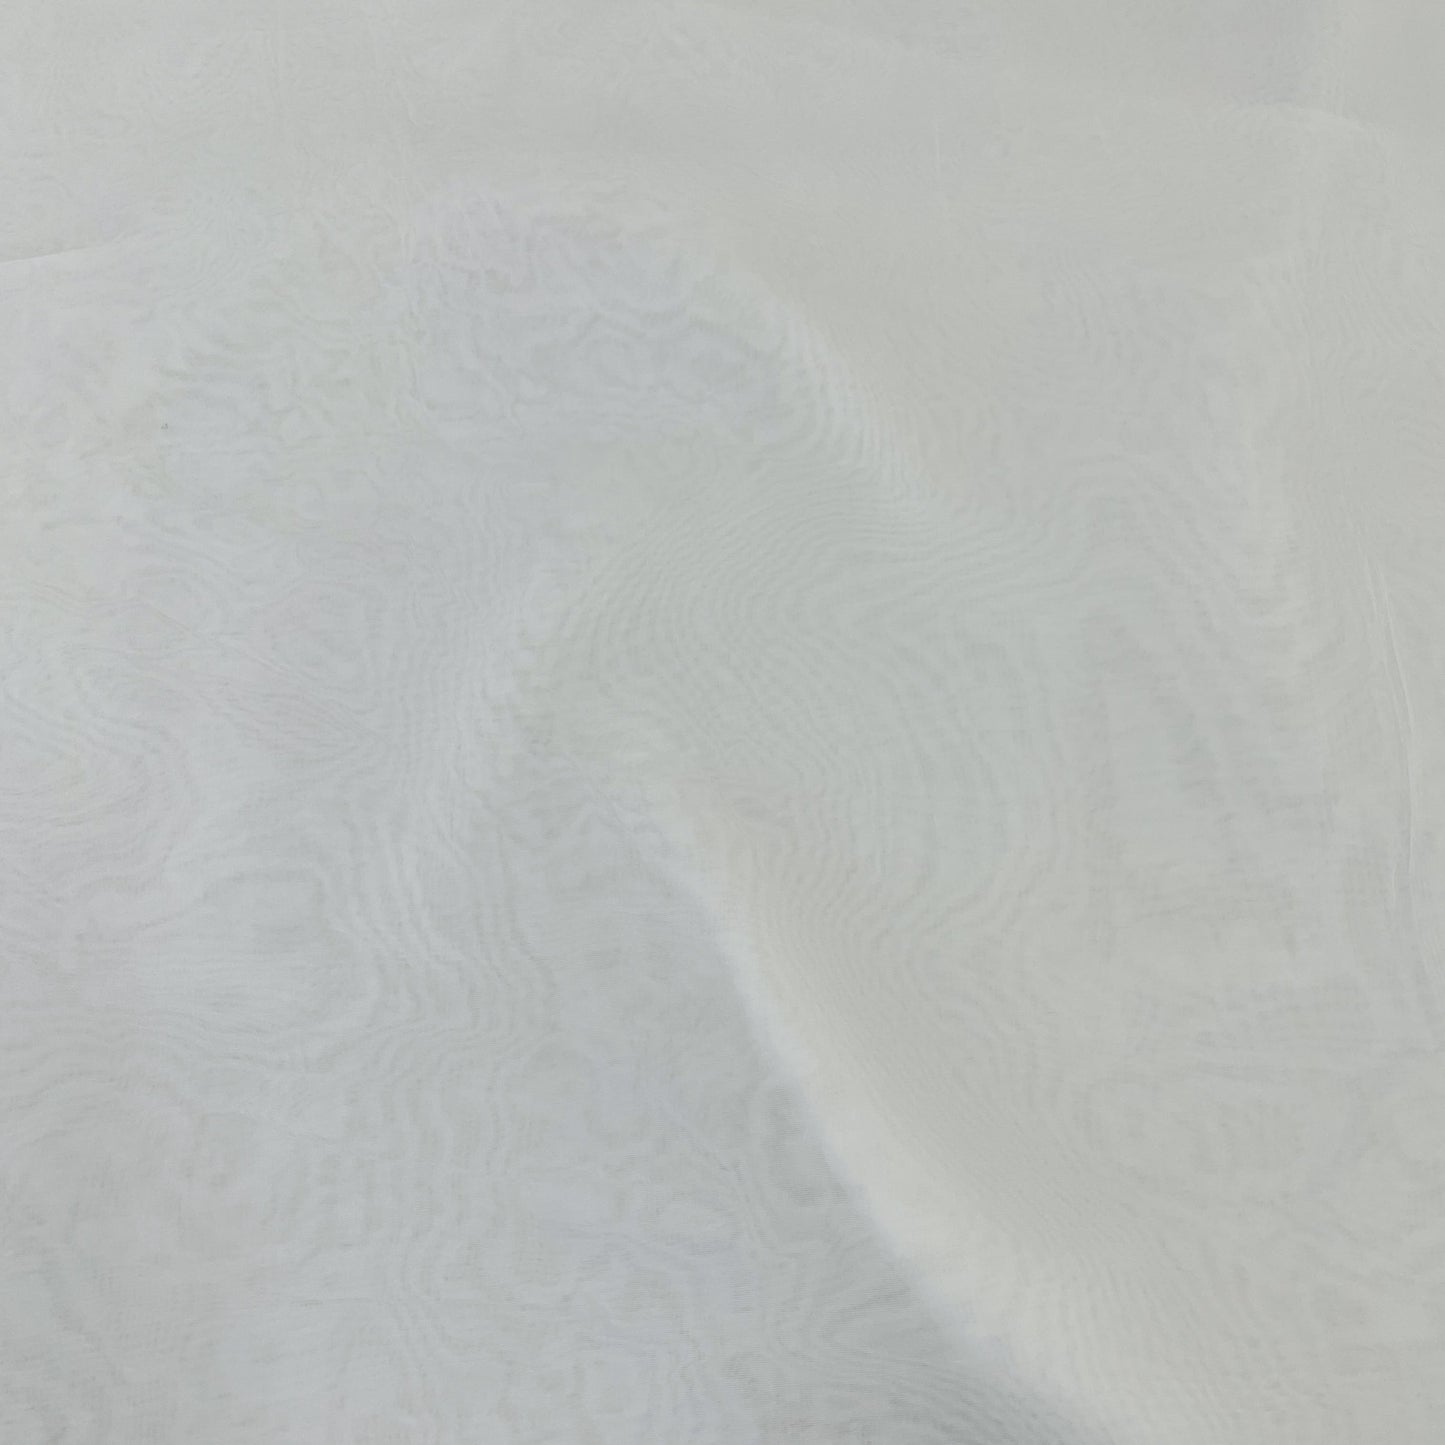 Exclusive White Solid Dyeable Organza Fabric